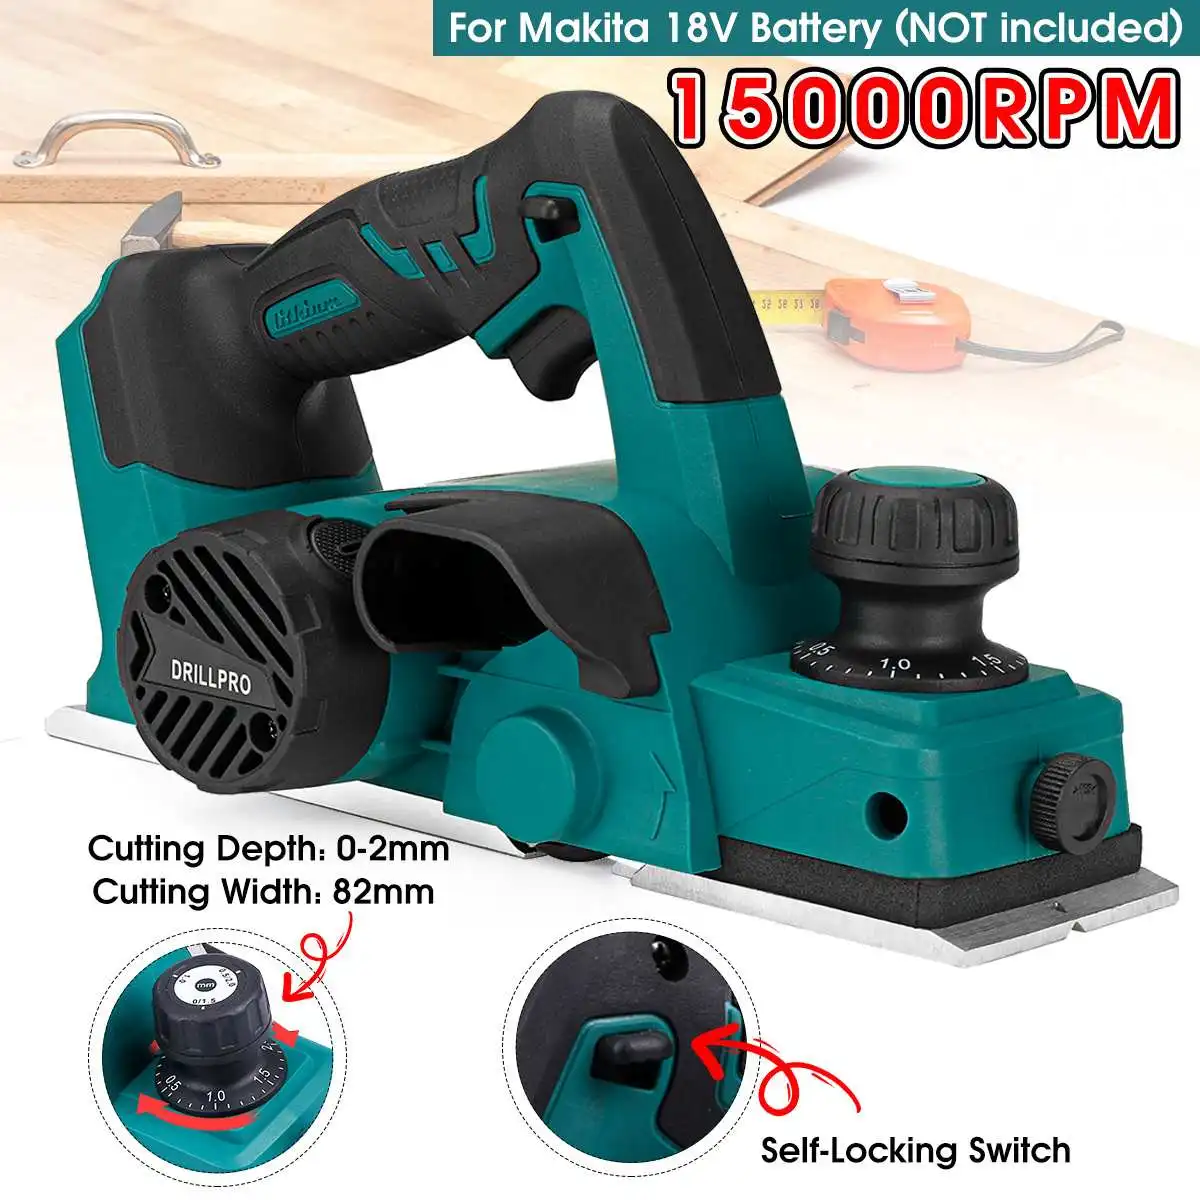 Drillpro 18V 15000RPM Rechargeable Electric Planer Cordless Handheld Wood Cutting Tool with Wrench for Makita 18V Battery